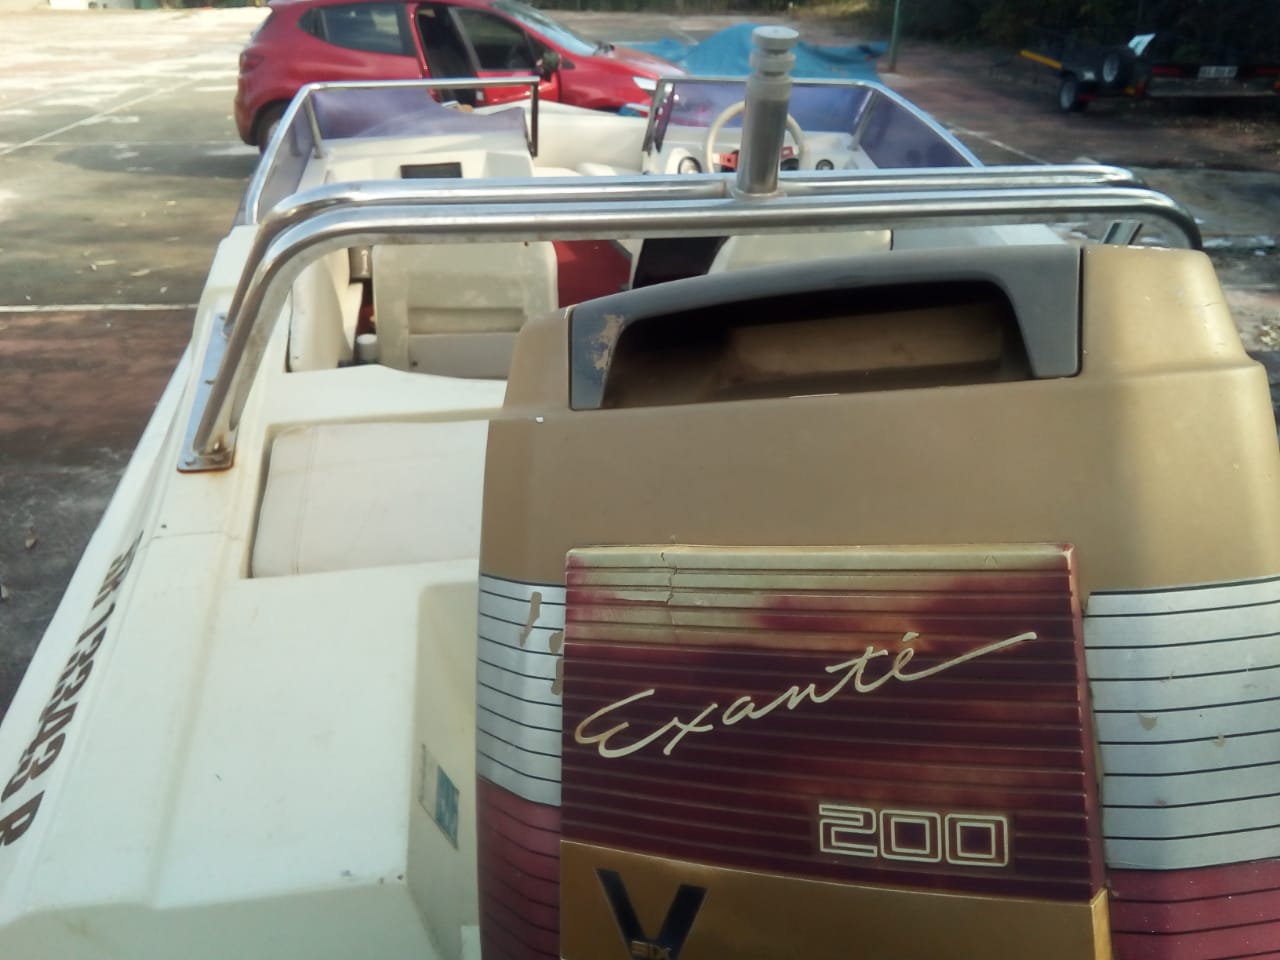 Xtaski boat with 200 motor, in running condition, on trailer